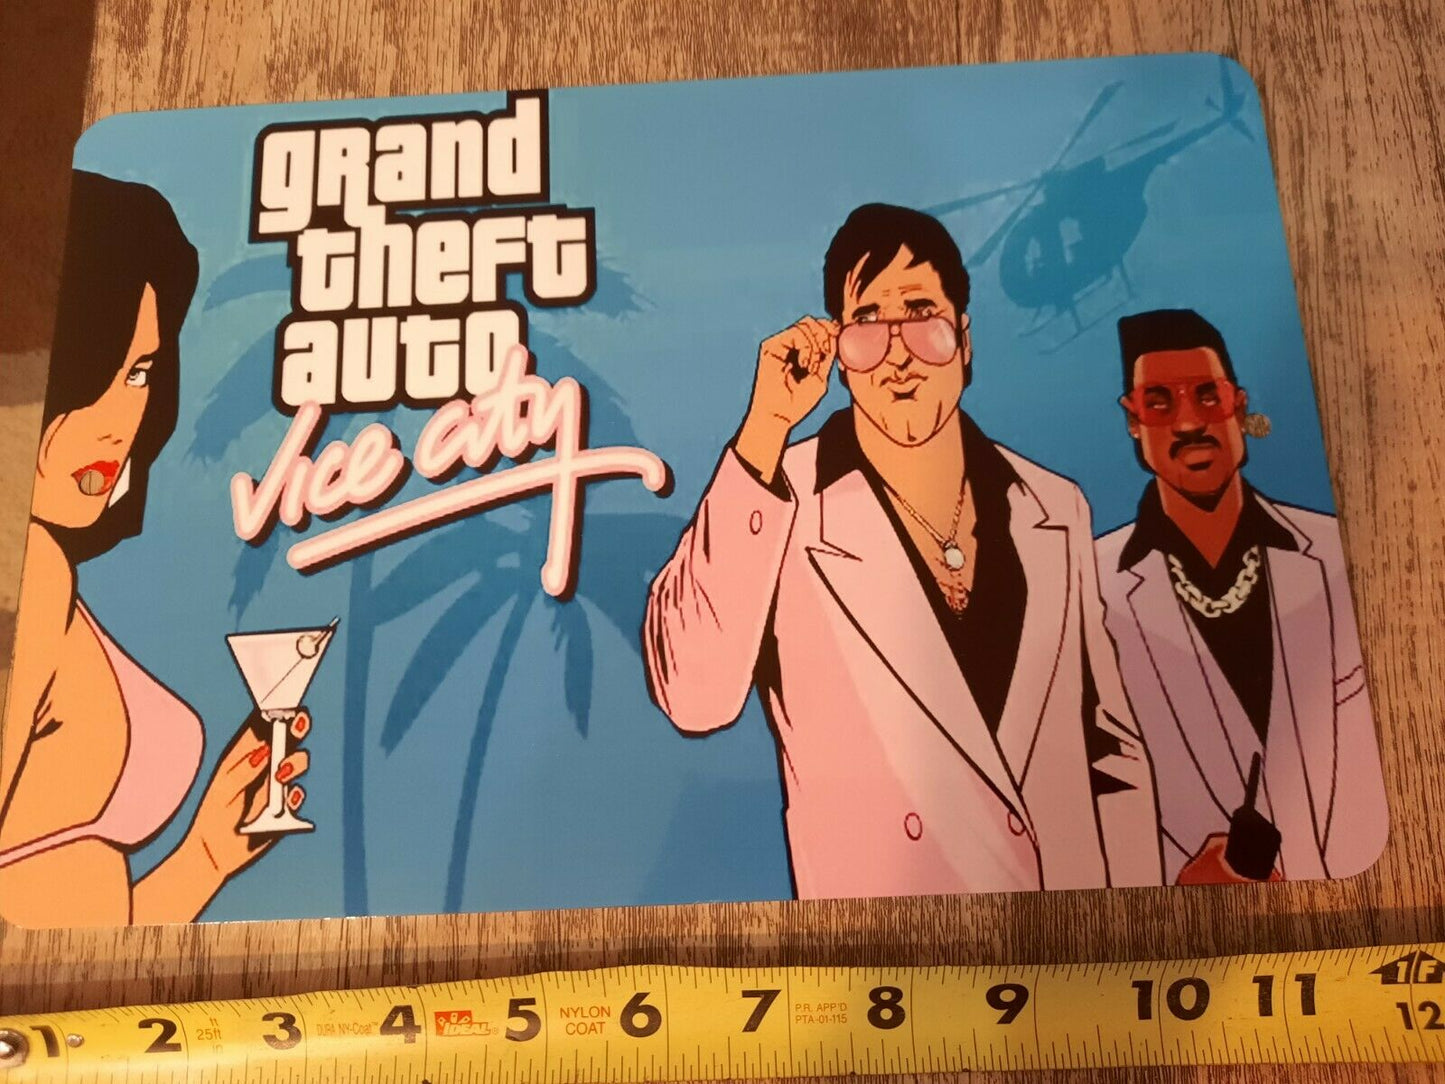 GTA Vice City Grand Theft Auto 8x12 Metal Wall Sign Arcade Video Game